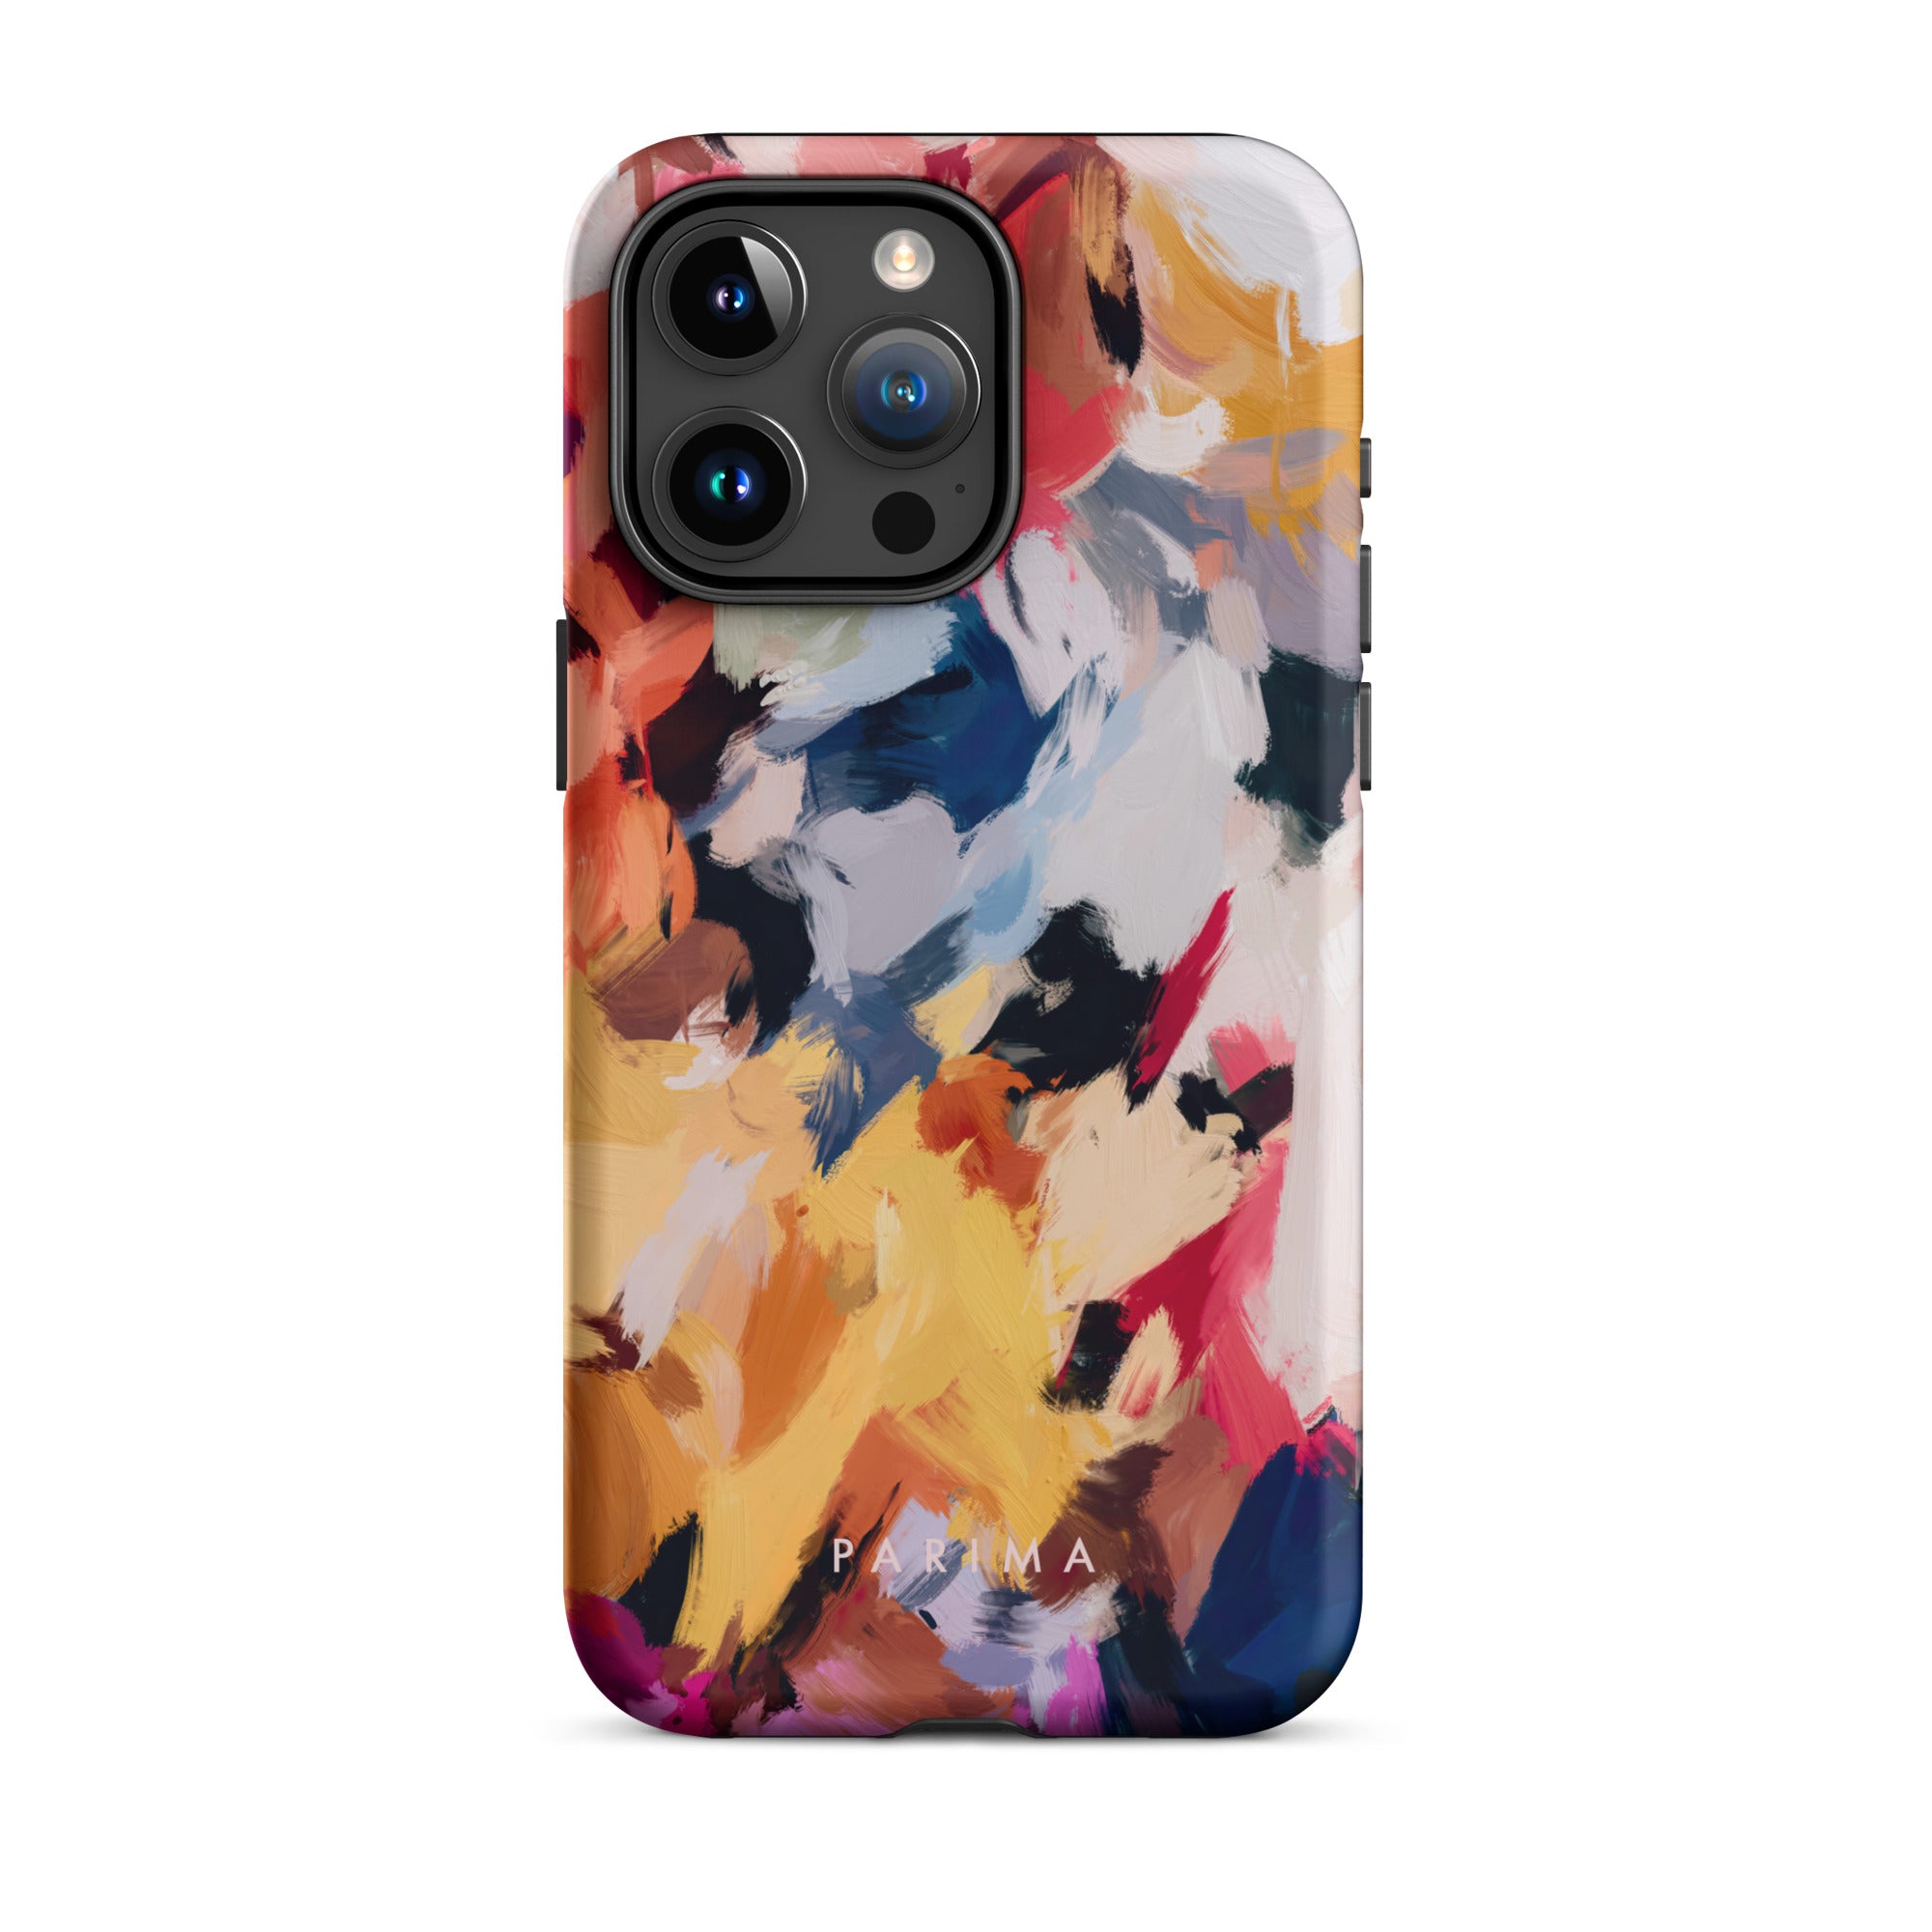 Wilde, blue and yellow abstract art on iPhone 15 Pro Max tough case by Parima Studio